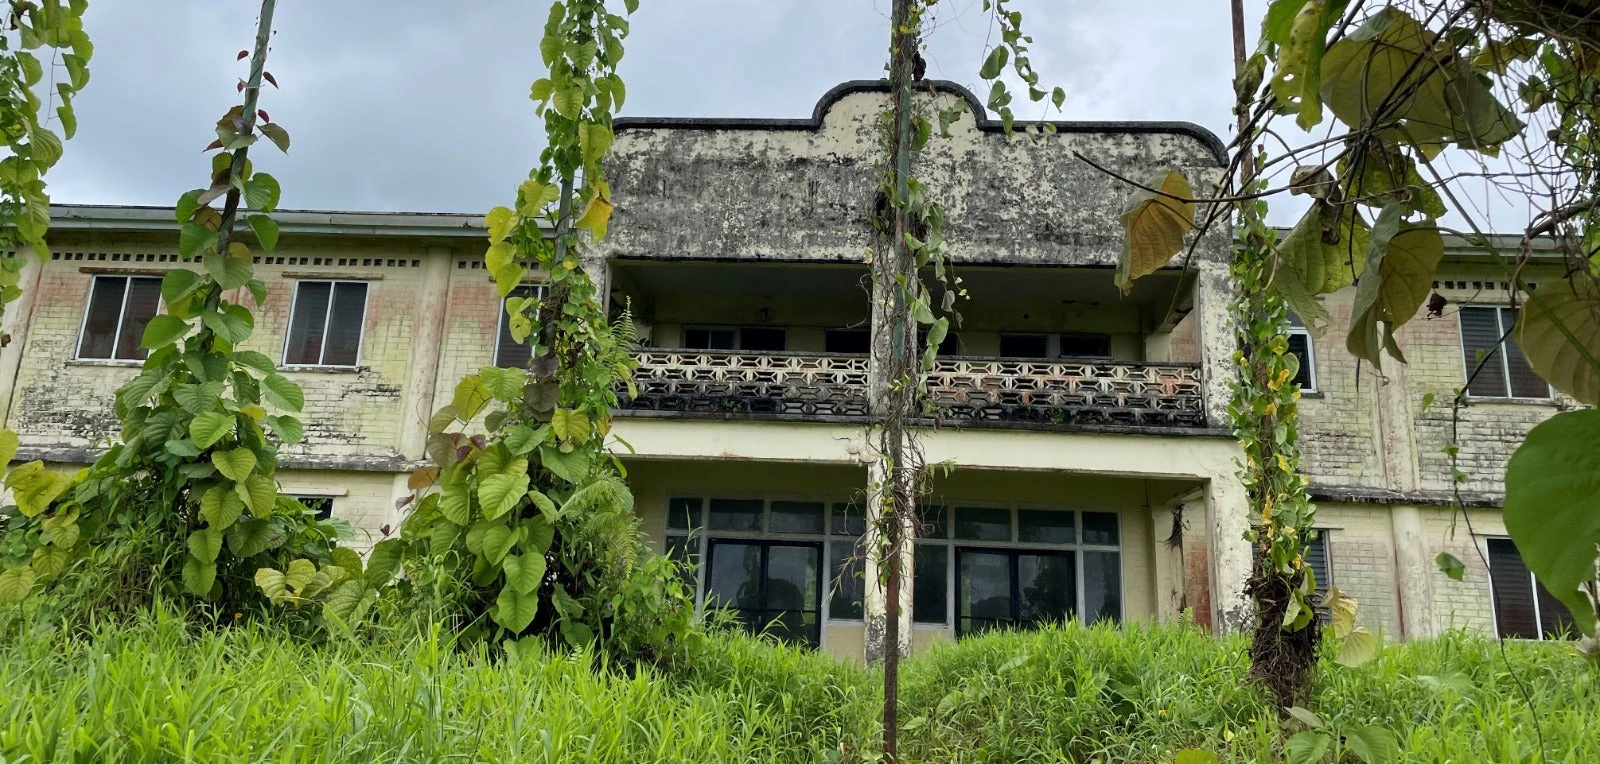 The old building of Pohnpei Agricultural and Trade School (PATS).